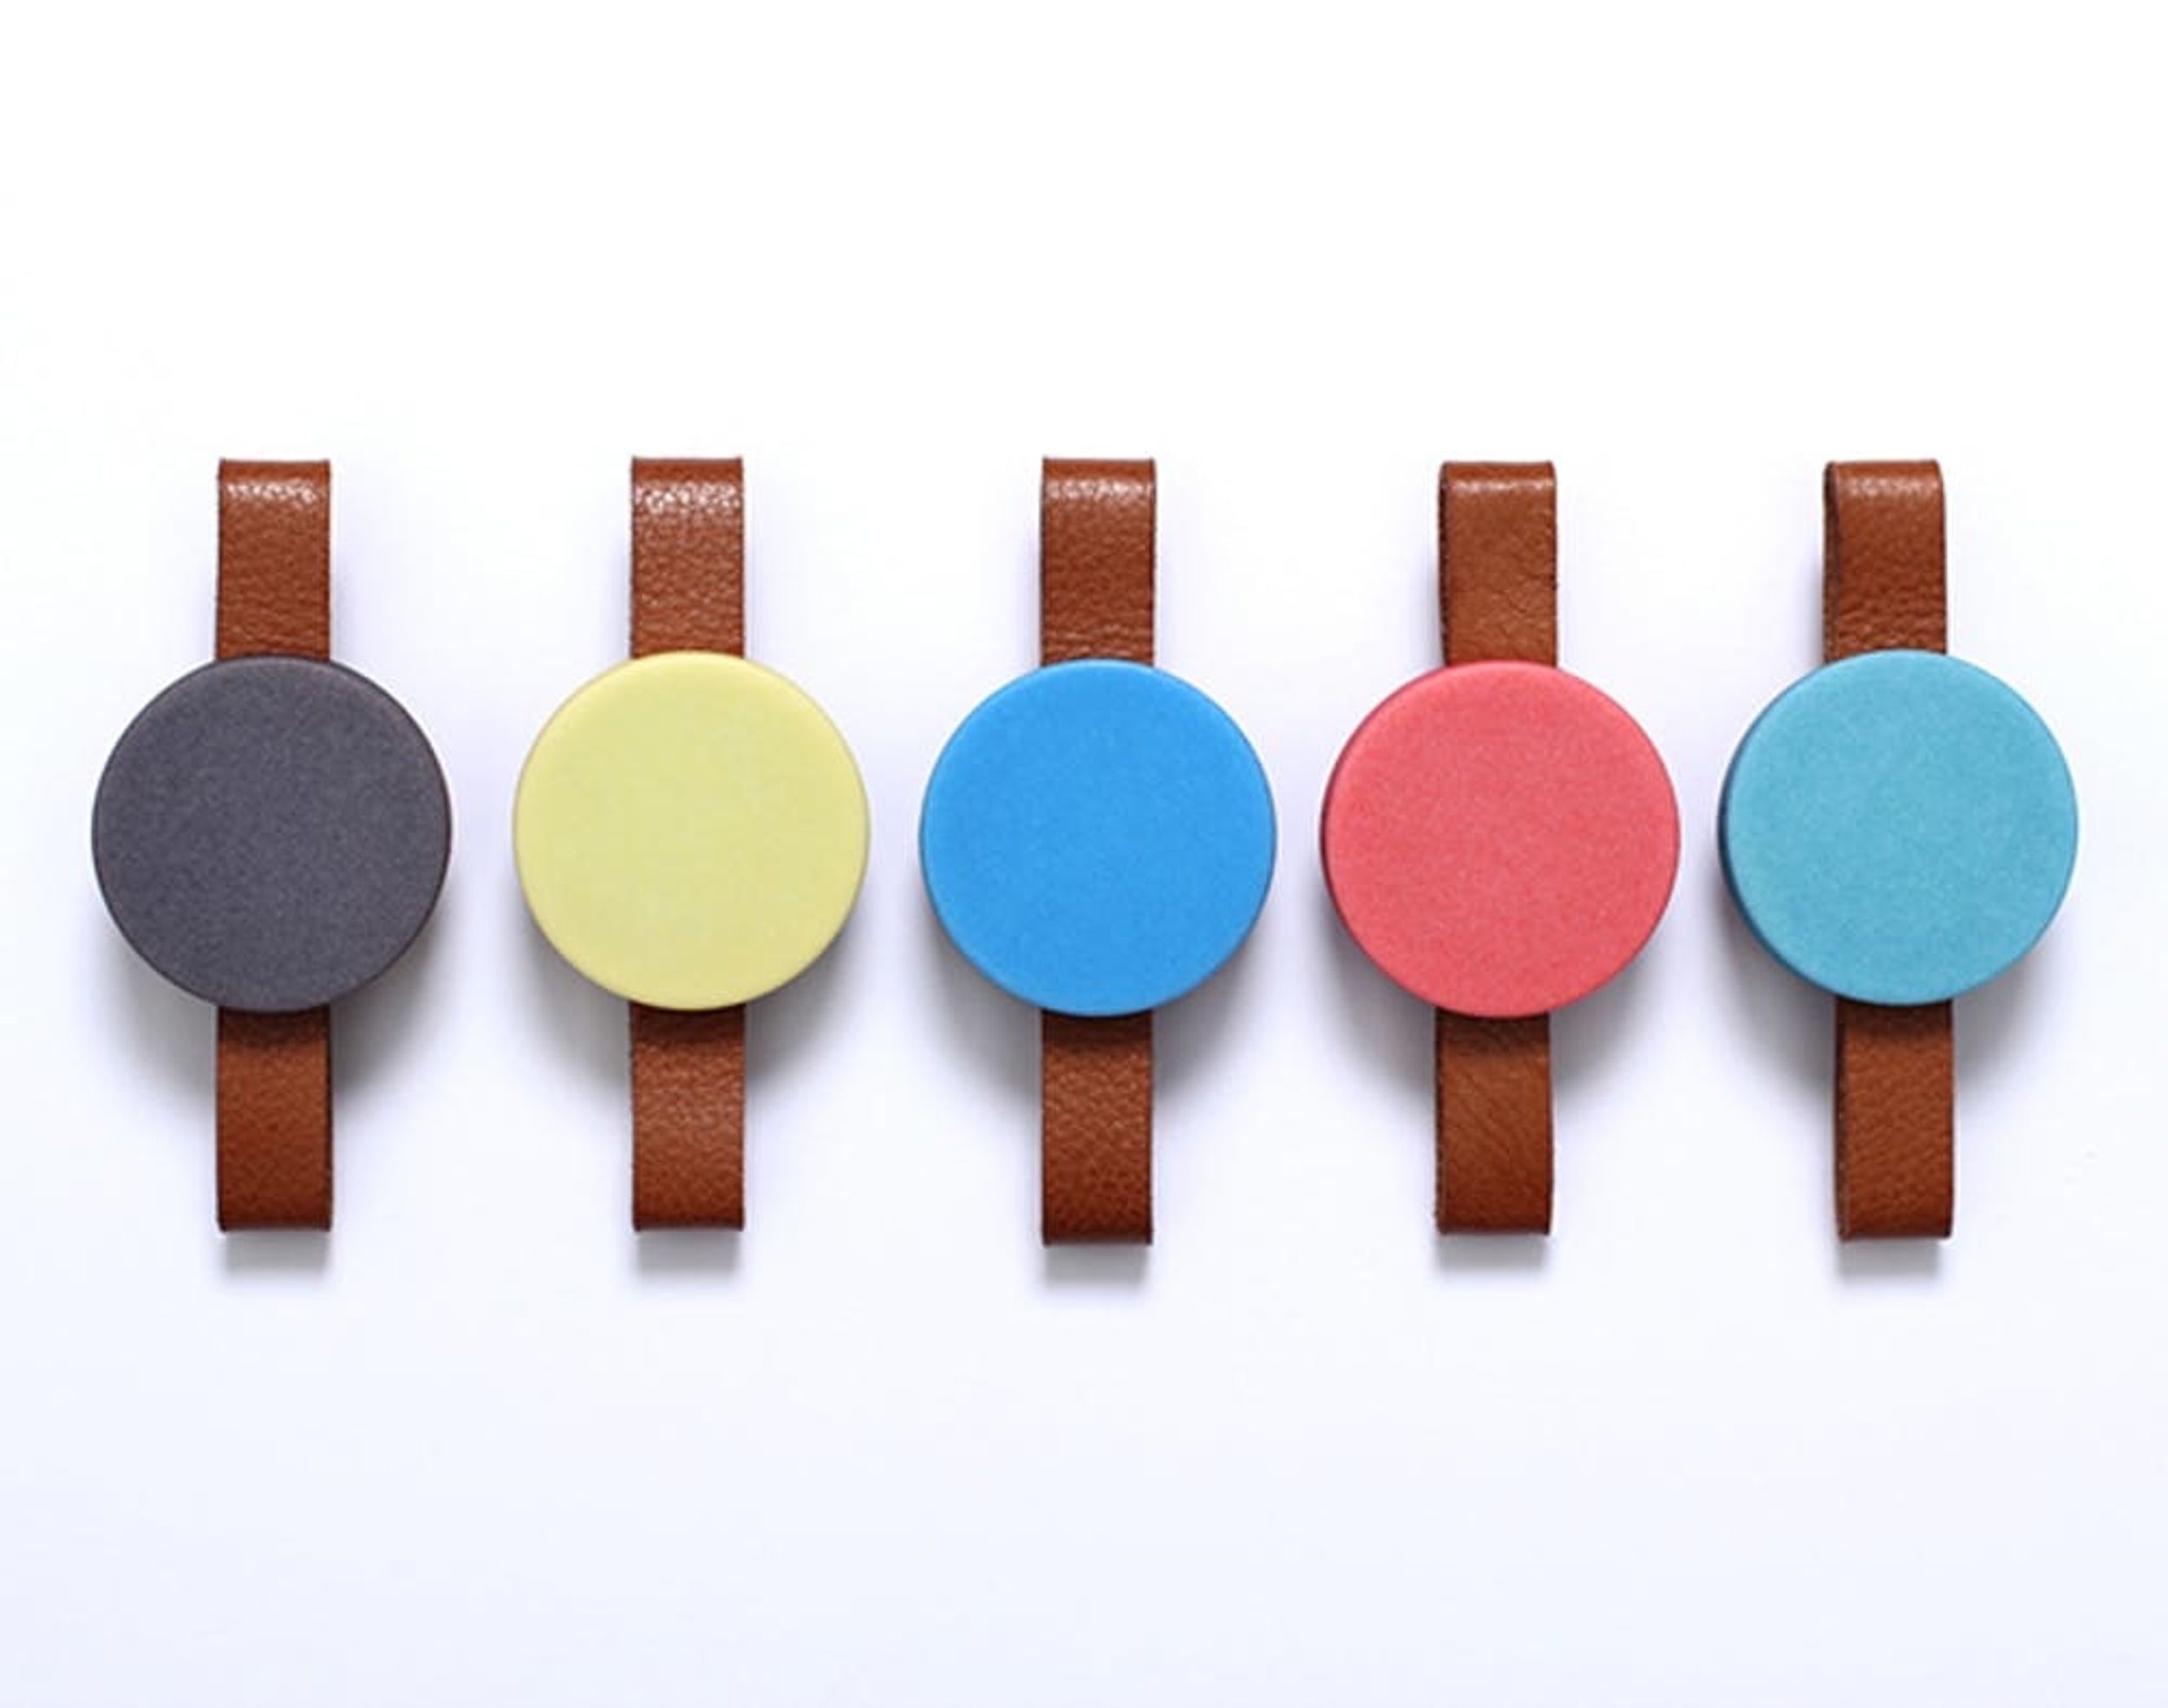 Durr Is a Beautiful Wearable That Vibrates to Tell Time